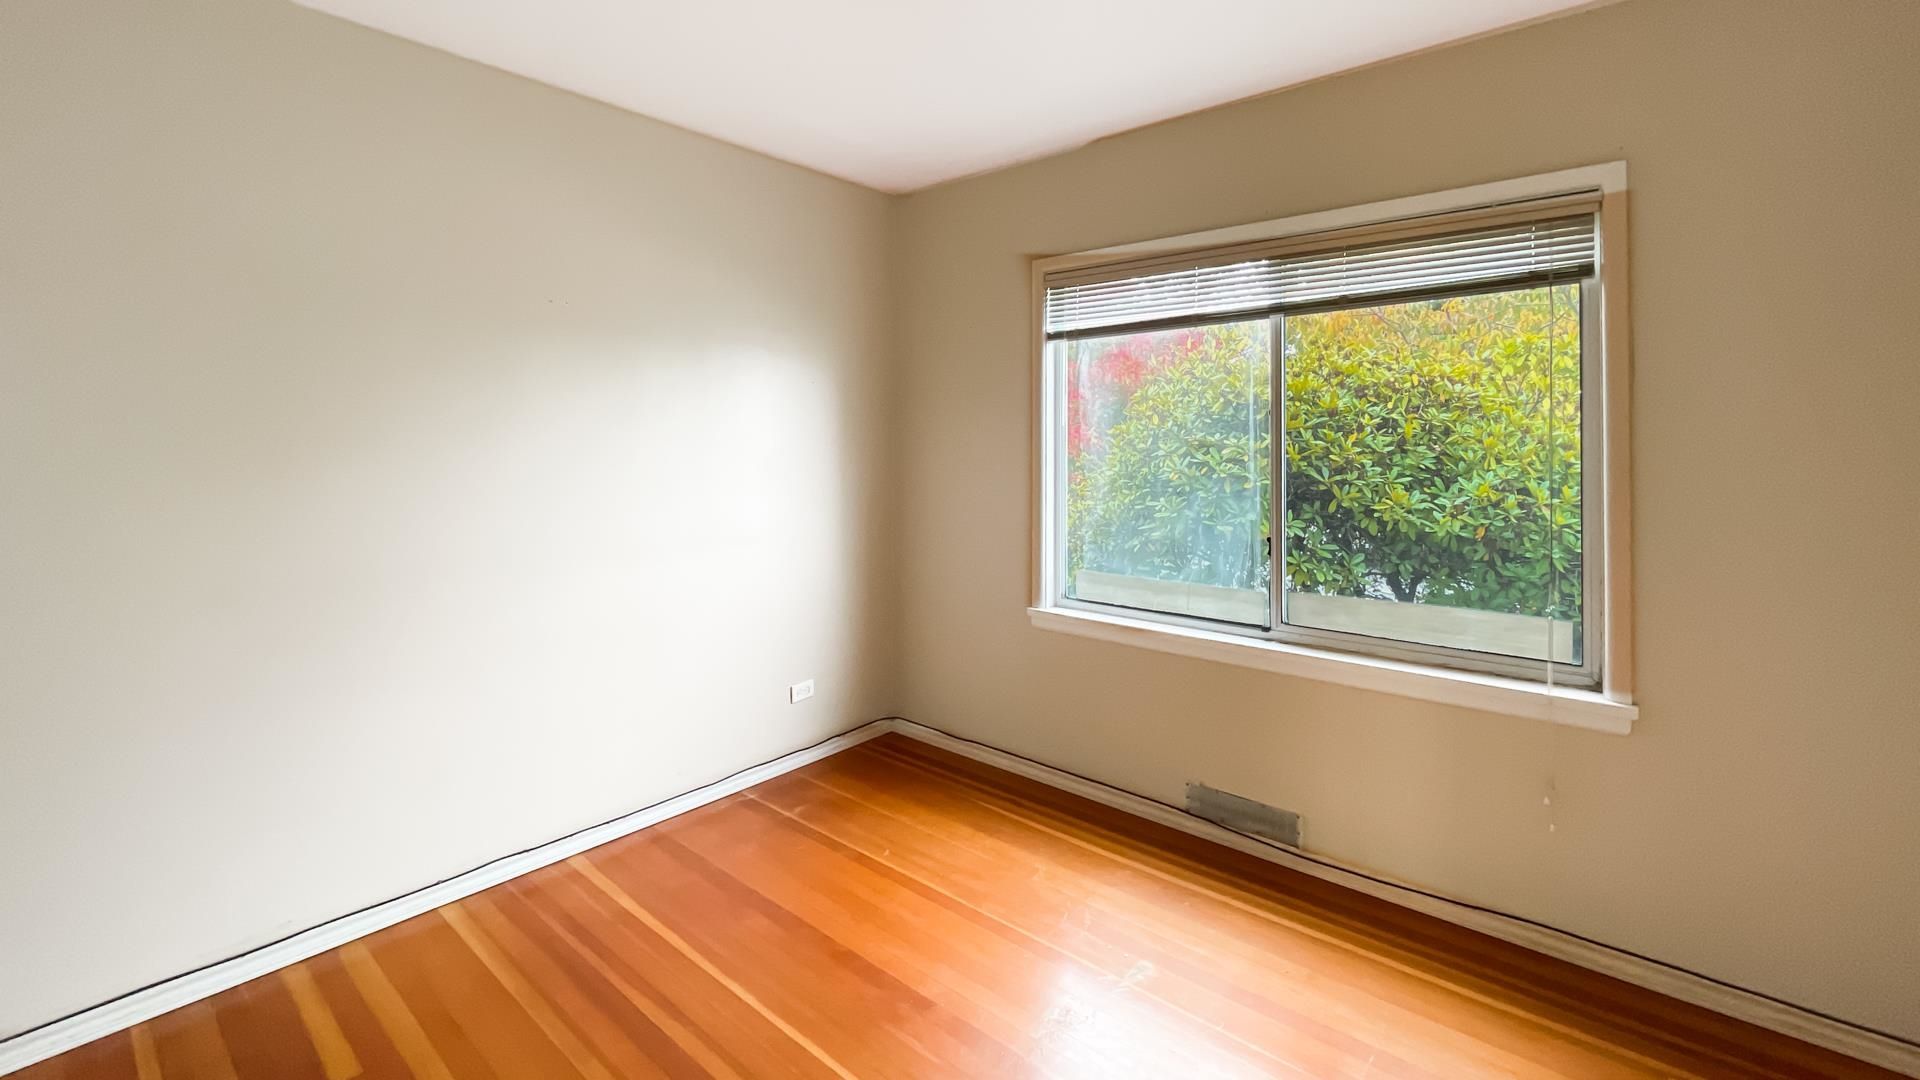 Photo 13: Photos: 4557 PARKER Street in Burnaby: Brentwood Park House for sale (Burnaby North)  : MLS®# R2626378